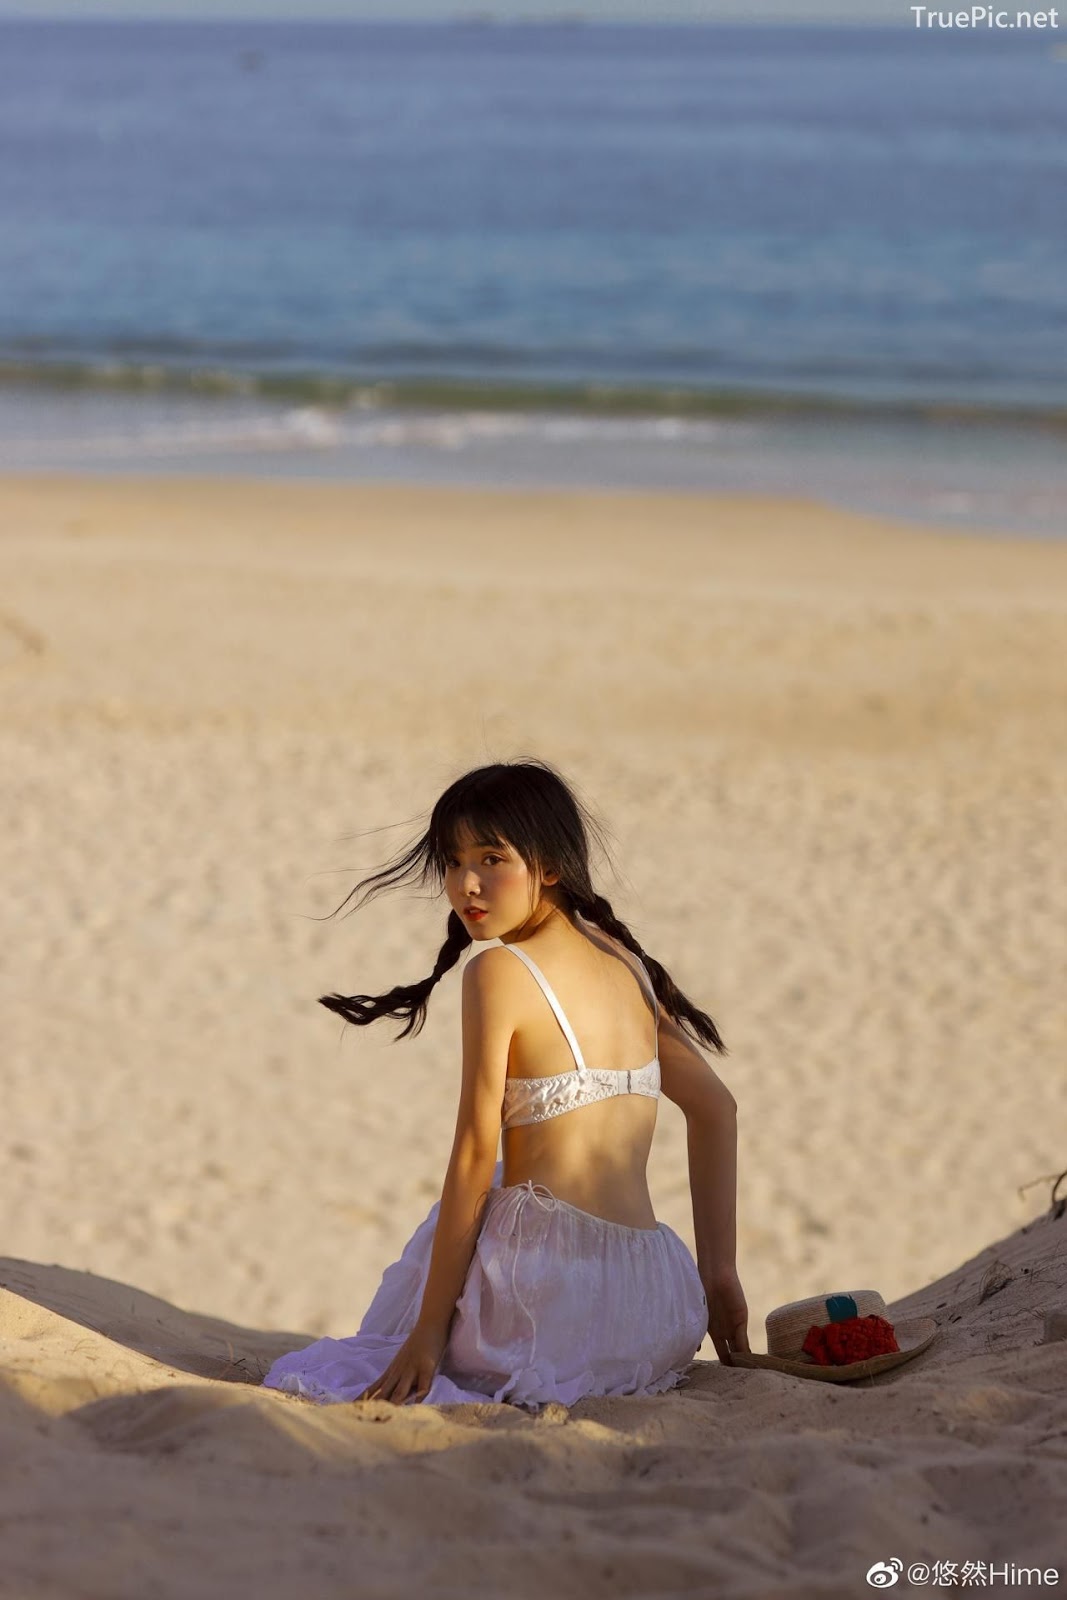 Chinese bautiful angel - Stay with you on a beautiful beach - TruePic.net - Picture 13